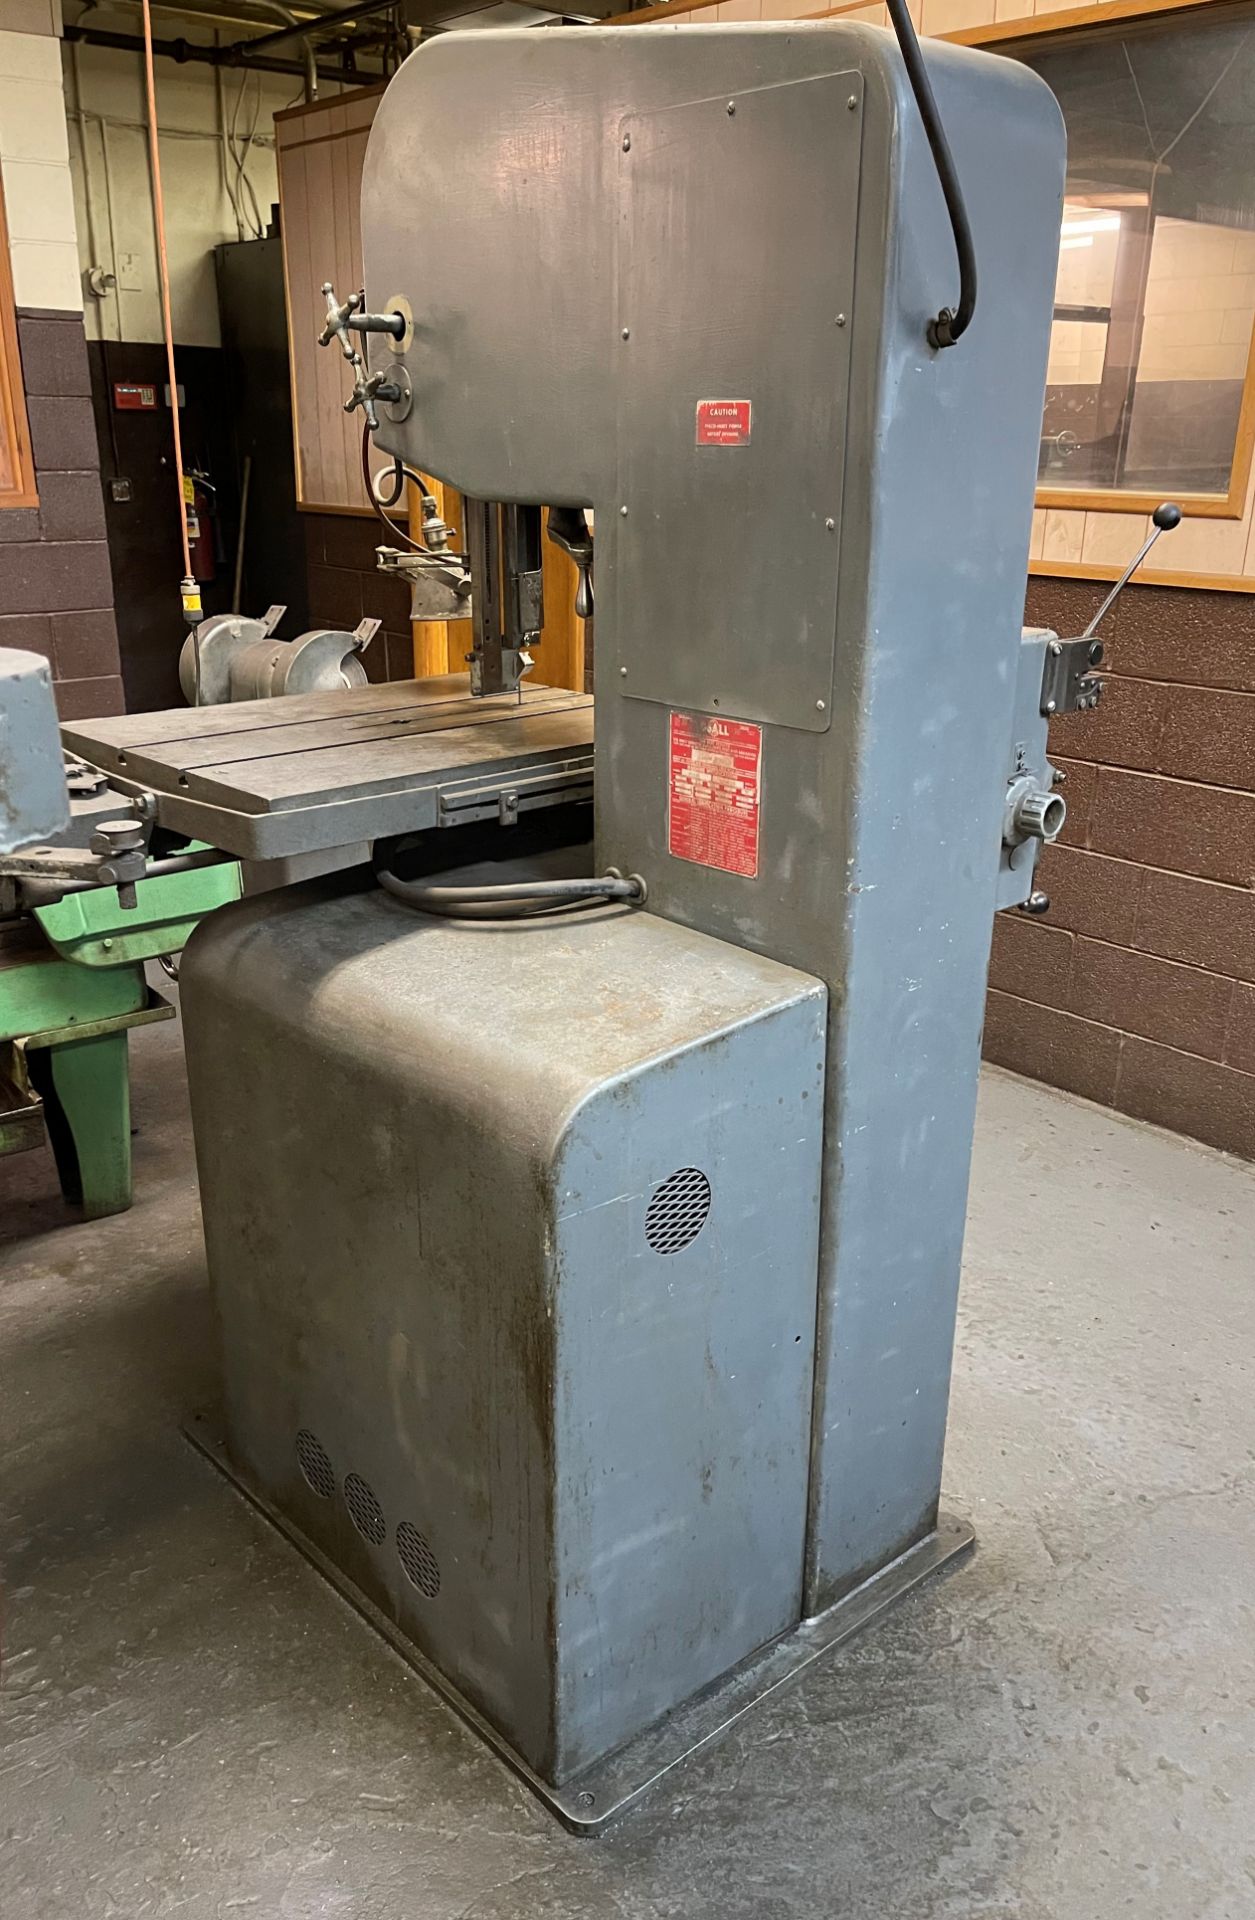 DoAll Mod.1612-3 16" Vertical Hyd. Band Saw - S/N 152-64515, 24" x 30.5" Tilt Table, 12" Work - Image 3 of 6